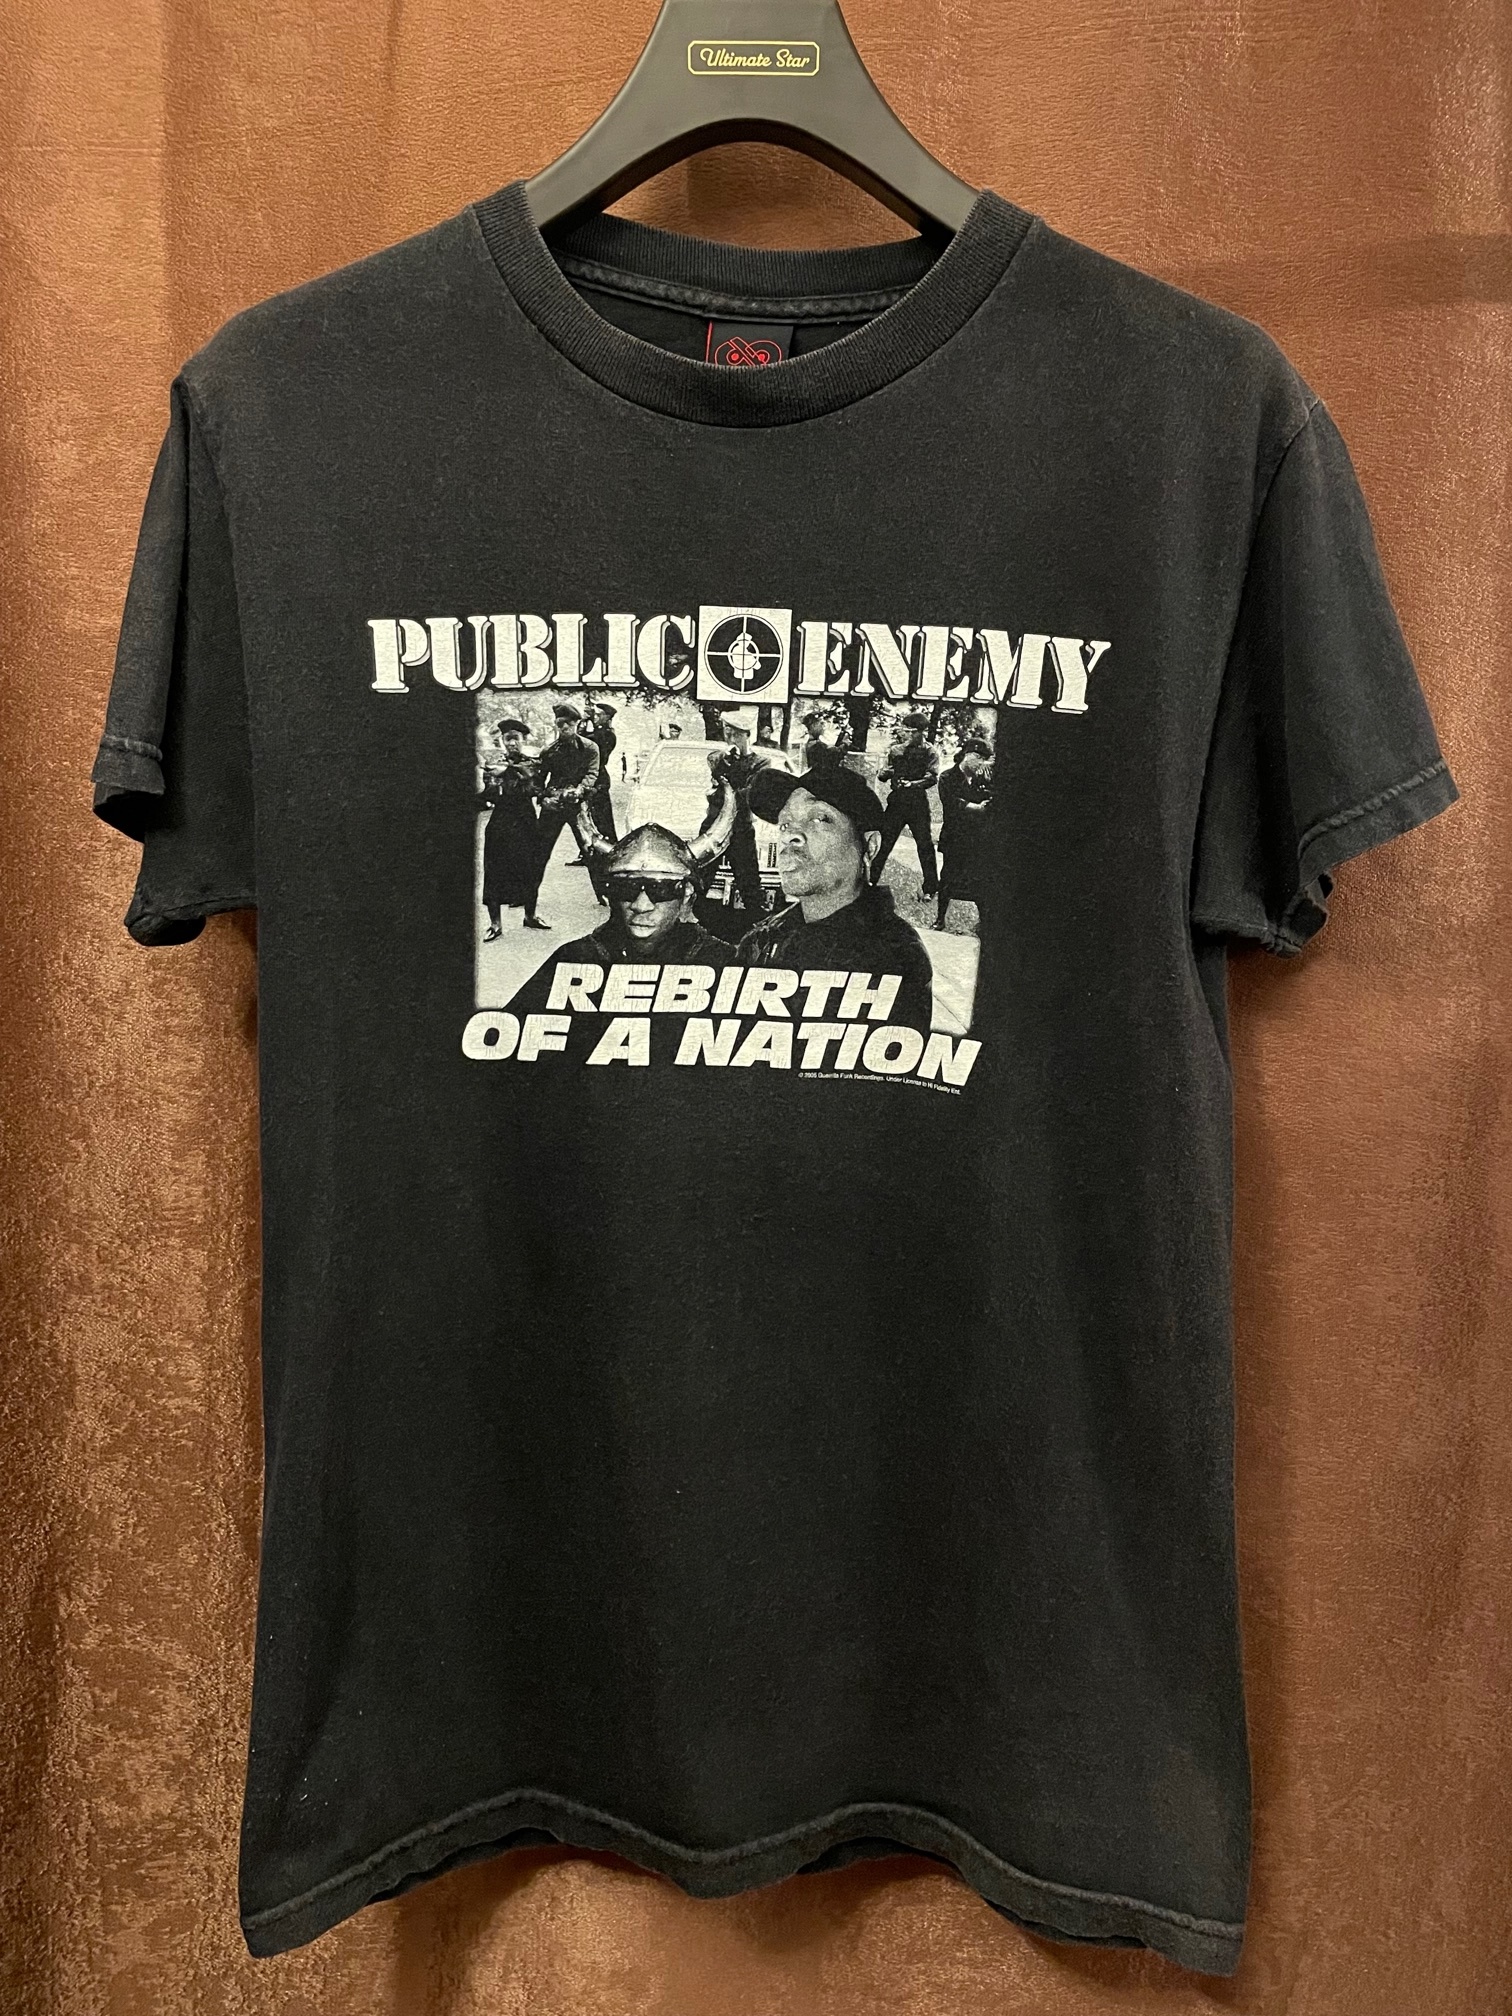 MADE IN MEXICO製 PUBLIC ENEMY「REBIRTH OF A NATION」CINDER BLOCK